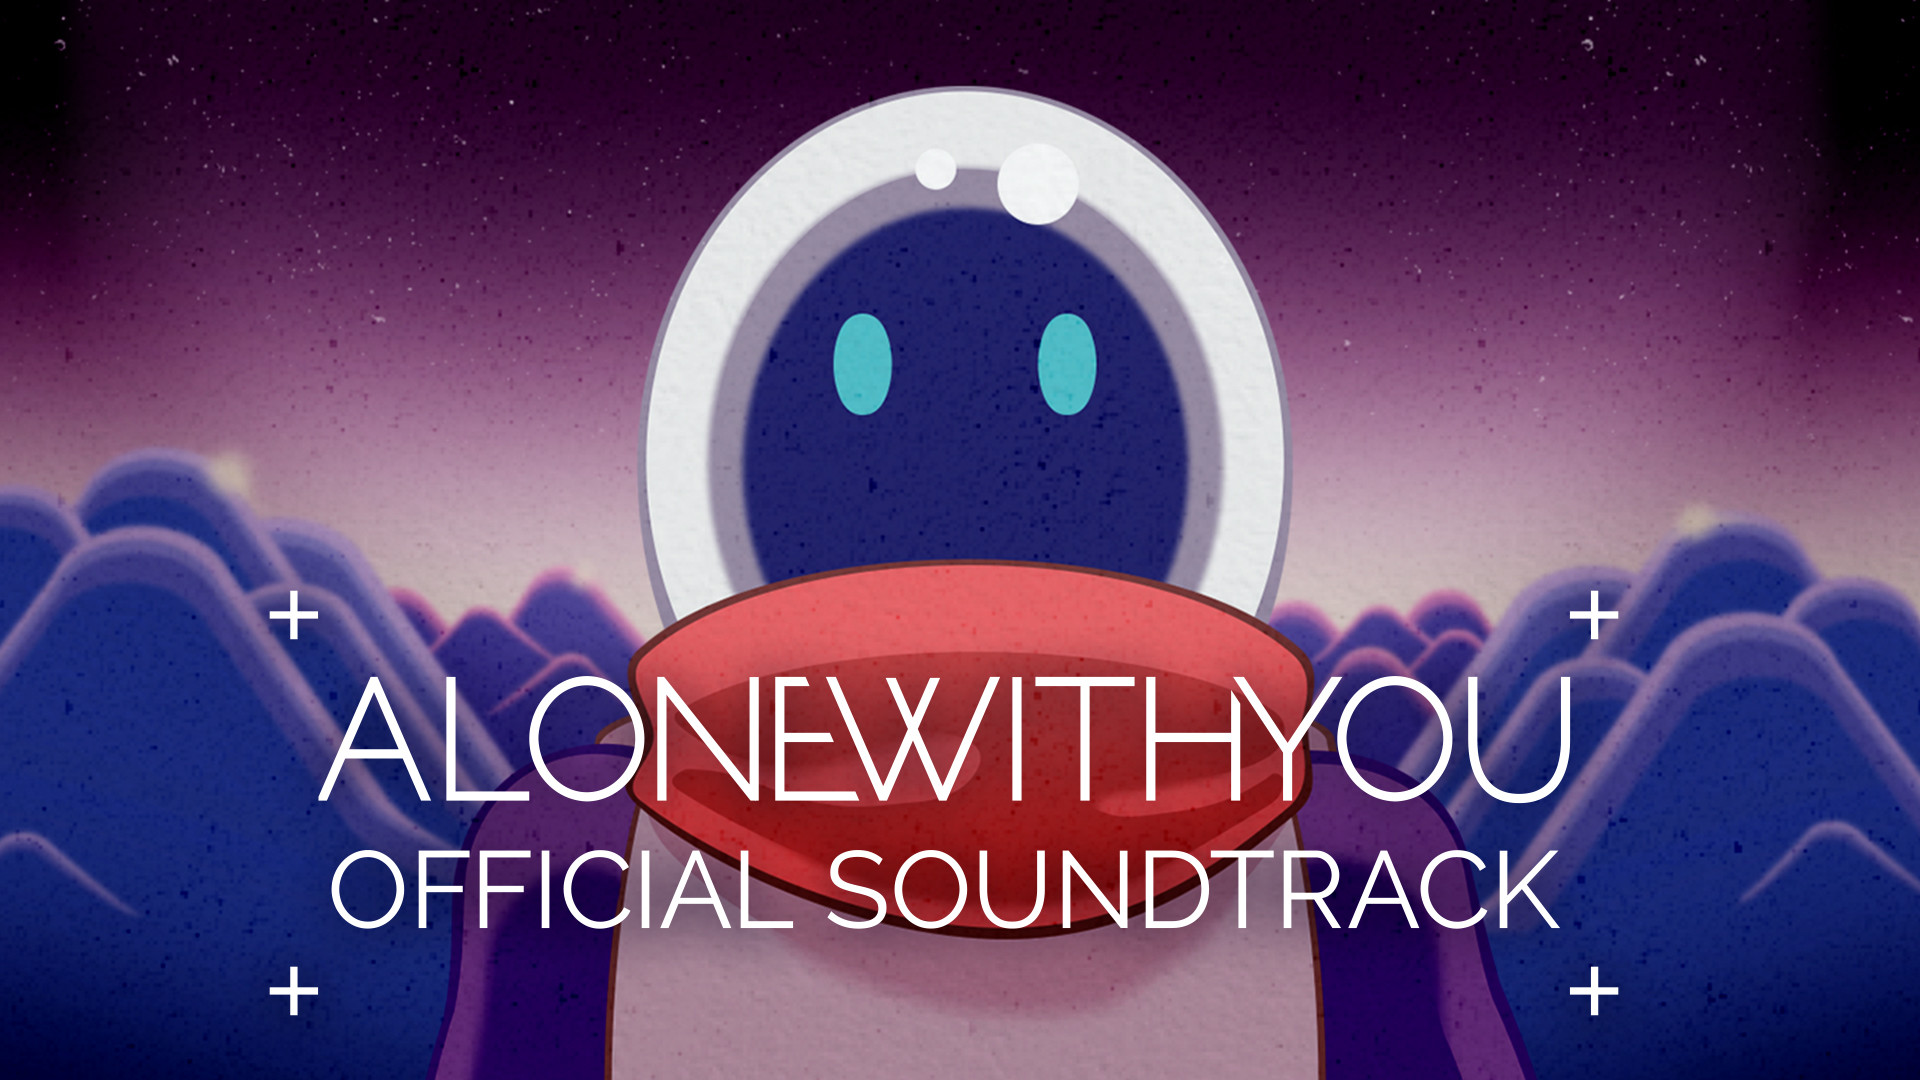 Alone With You - Official Soundtrack Featured Screenshot #1